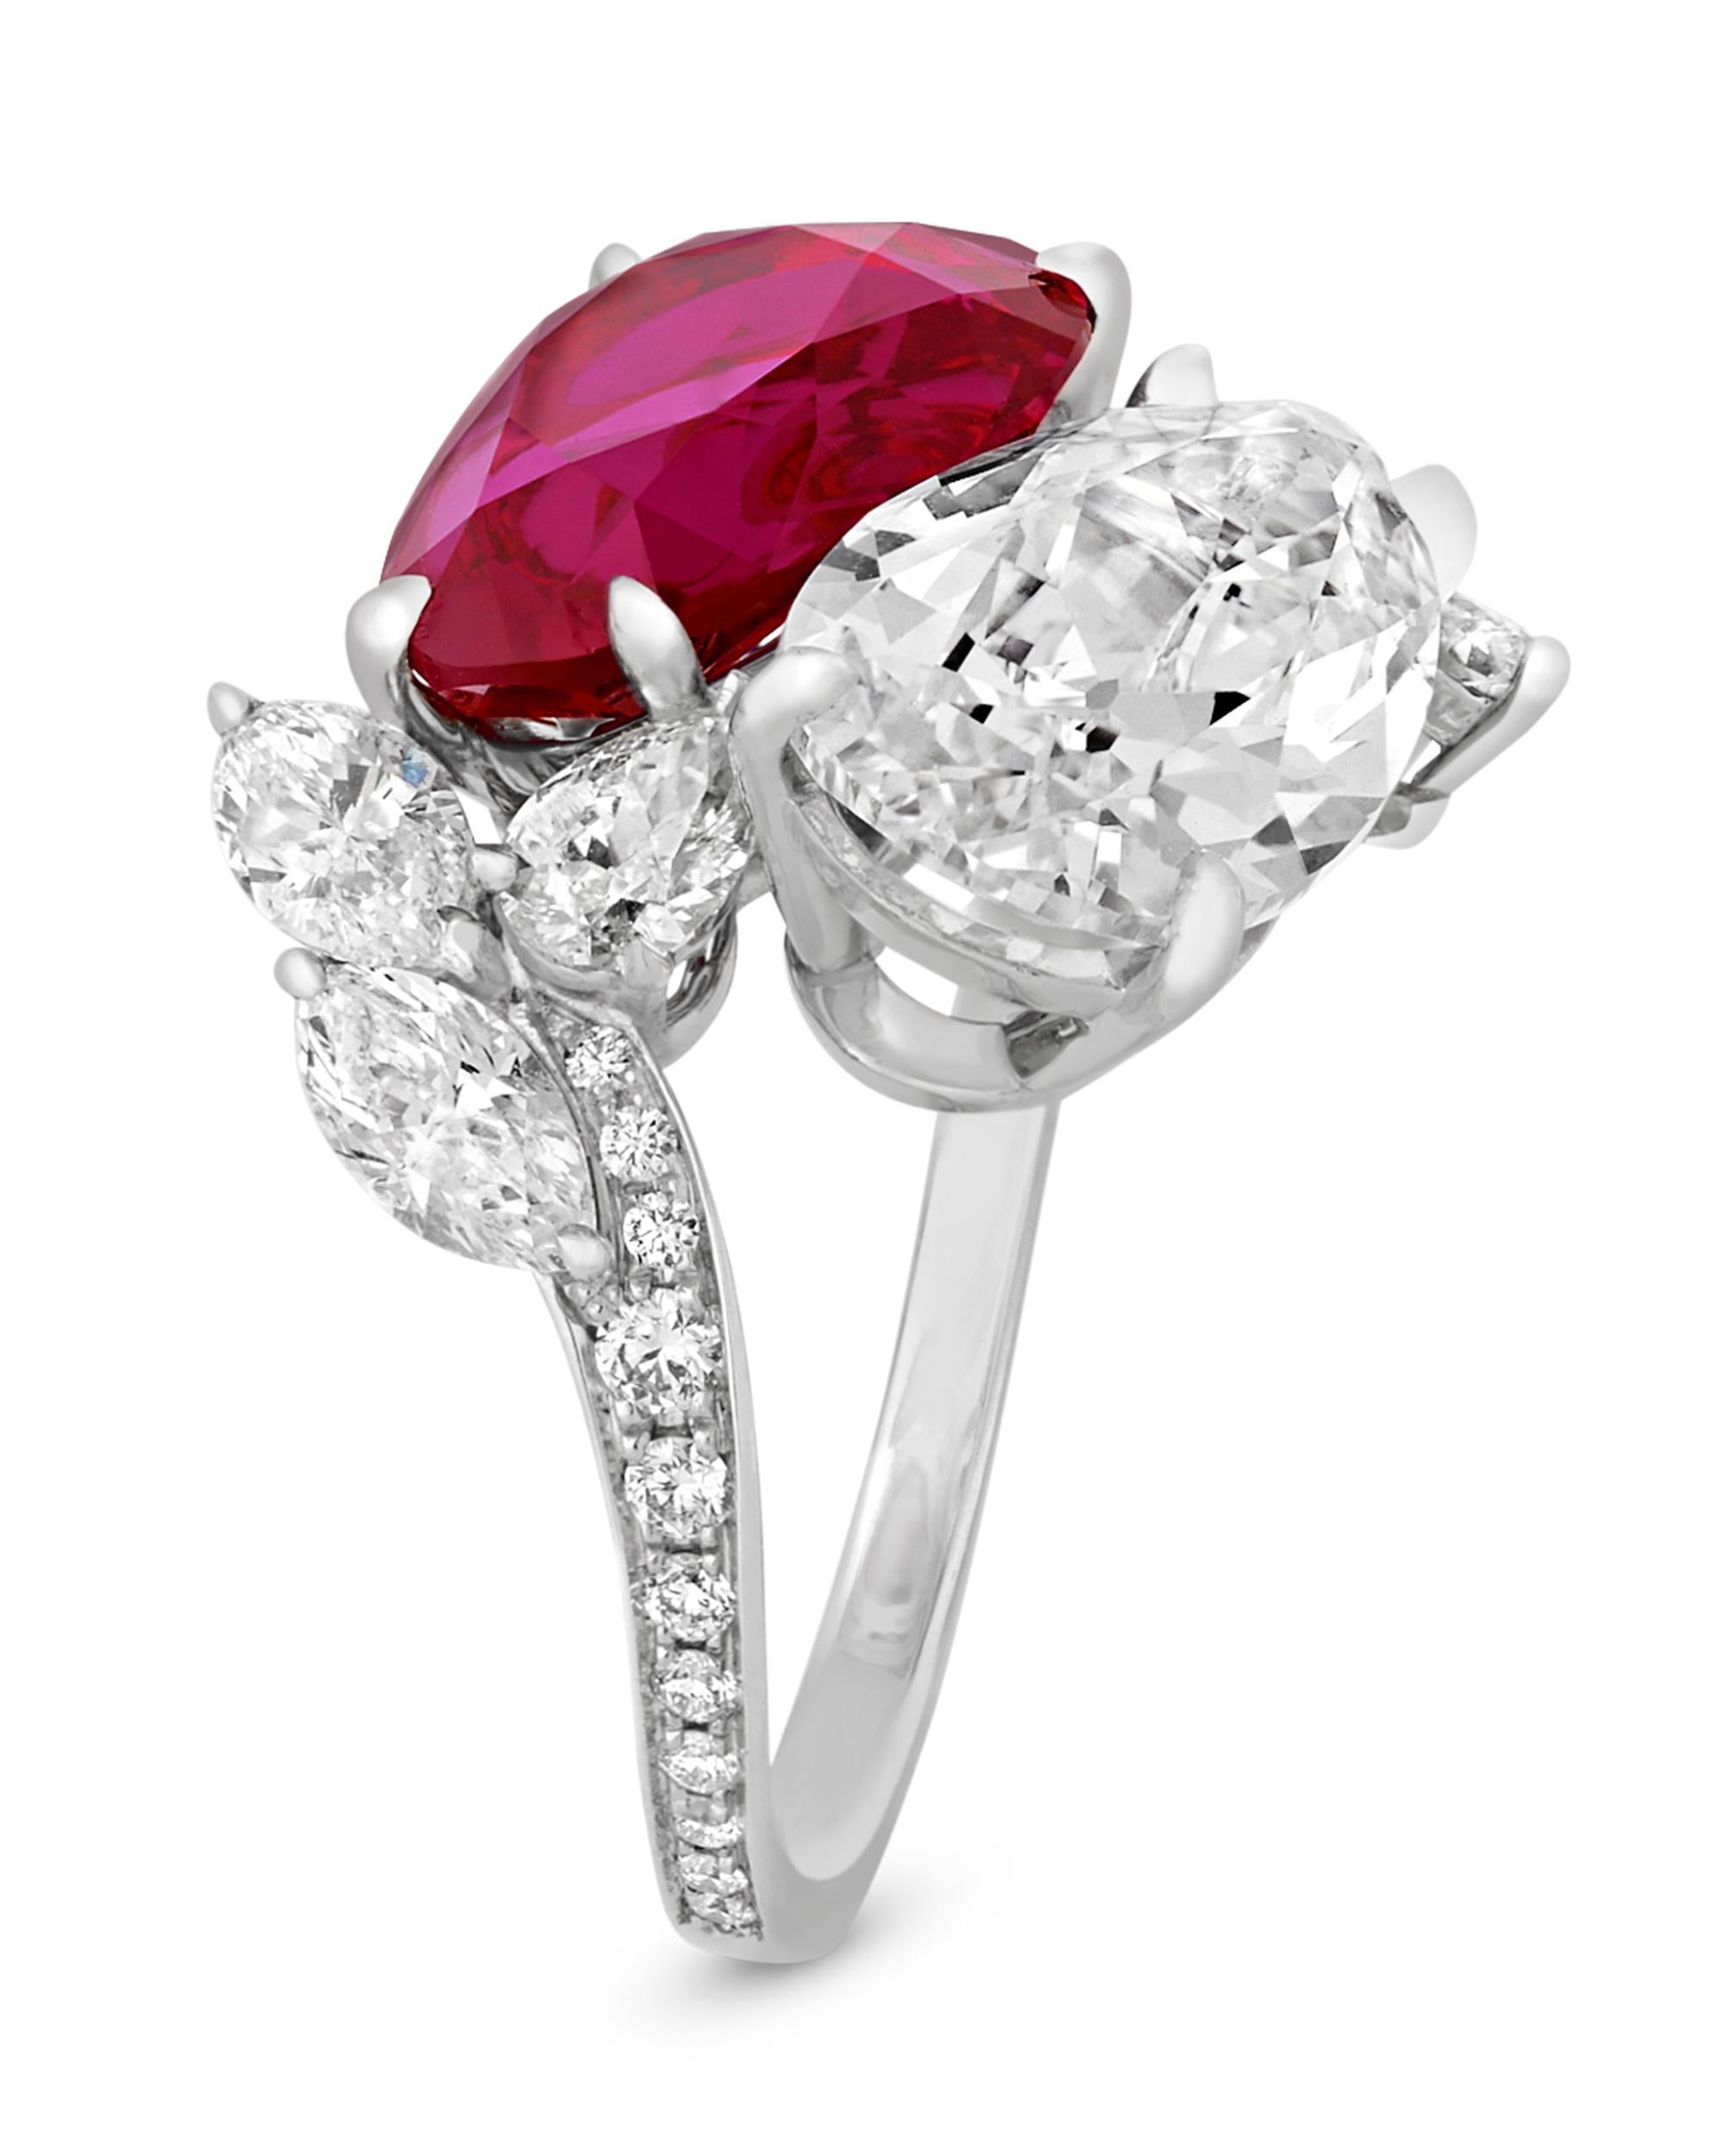 The exquisite 5.70-carat ruby and 4.54-carat diamond showcased in this bypass ring create a tantalizing interplay. The pear-shaped crimson gemstone is certified by the American Gemological Laboratories as being Burmese in origin and all natural,